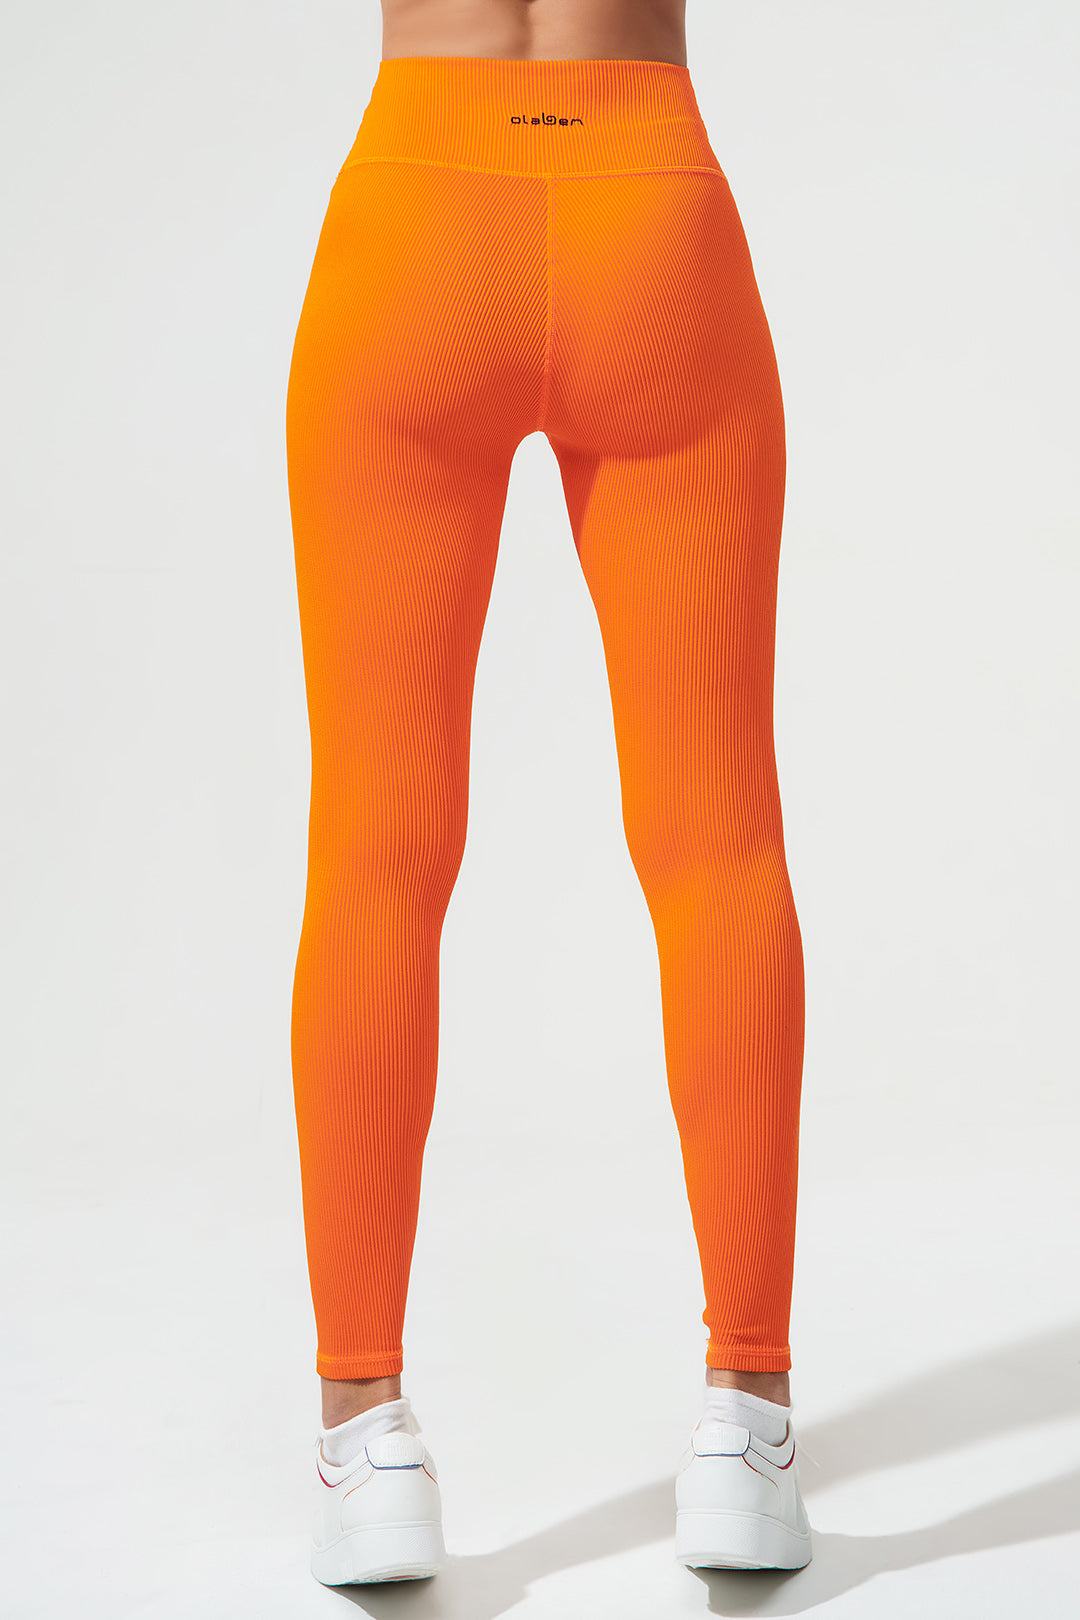 Vibrant tangerine orange high-waist leggings for women, perfect for a stylish and comfortable look.